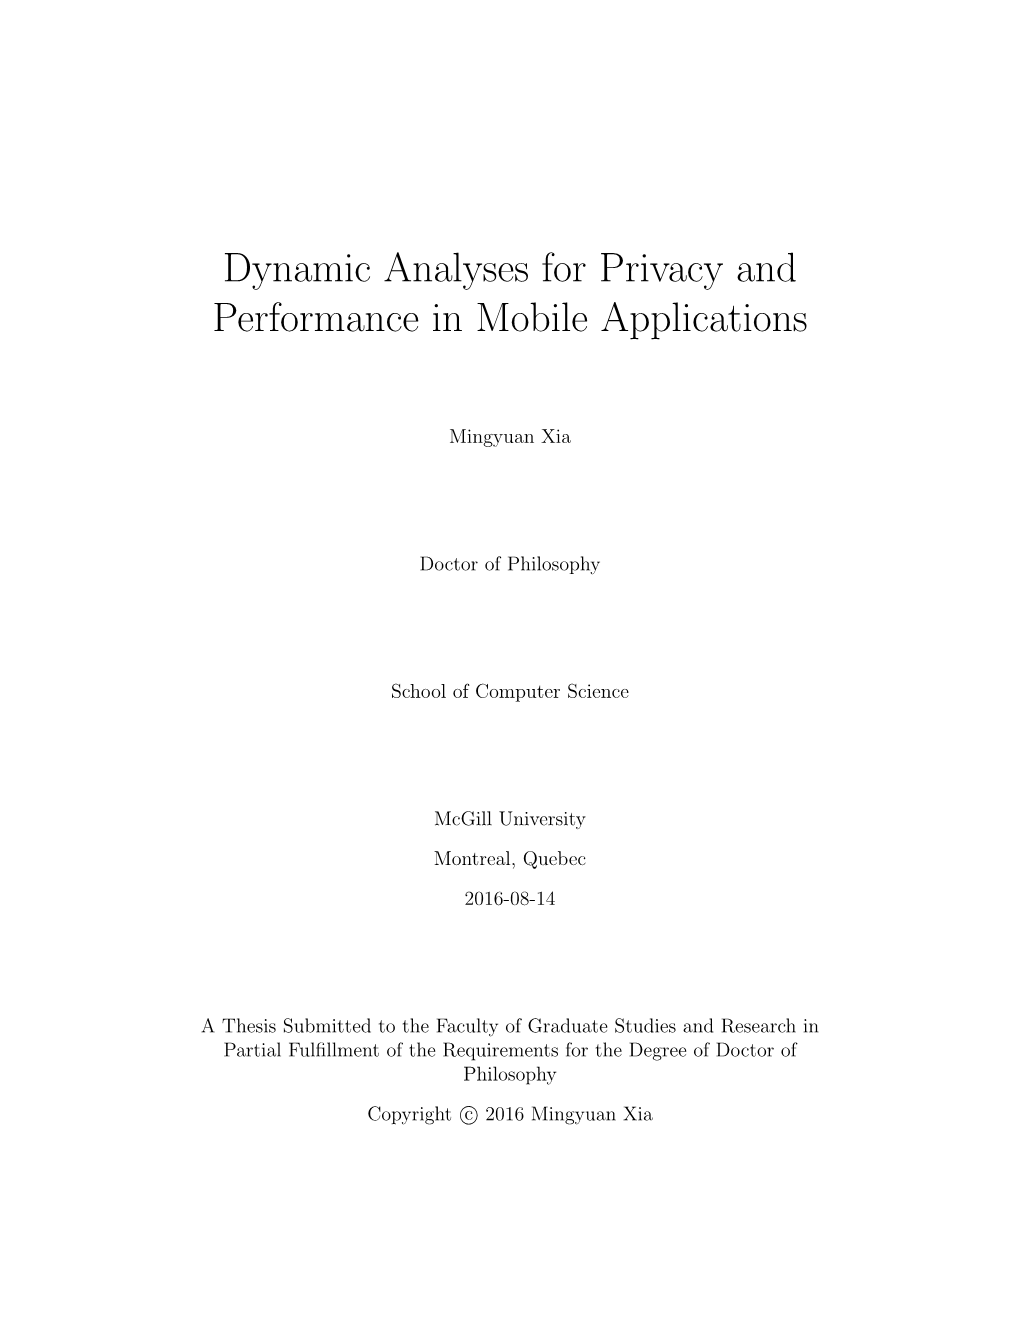 Dynamic Analyses for Privacy and Performance in Mobile Applications